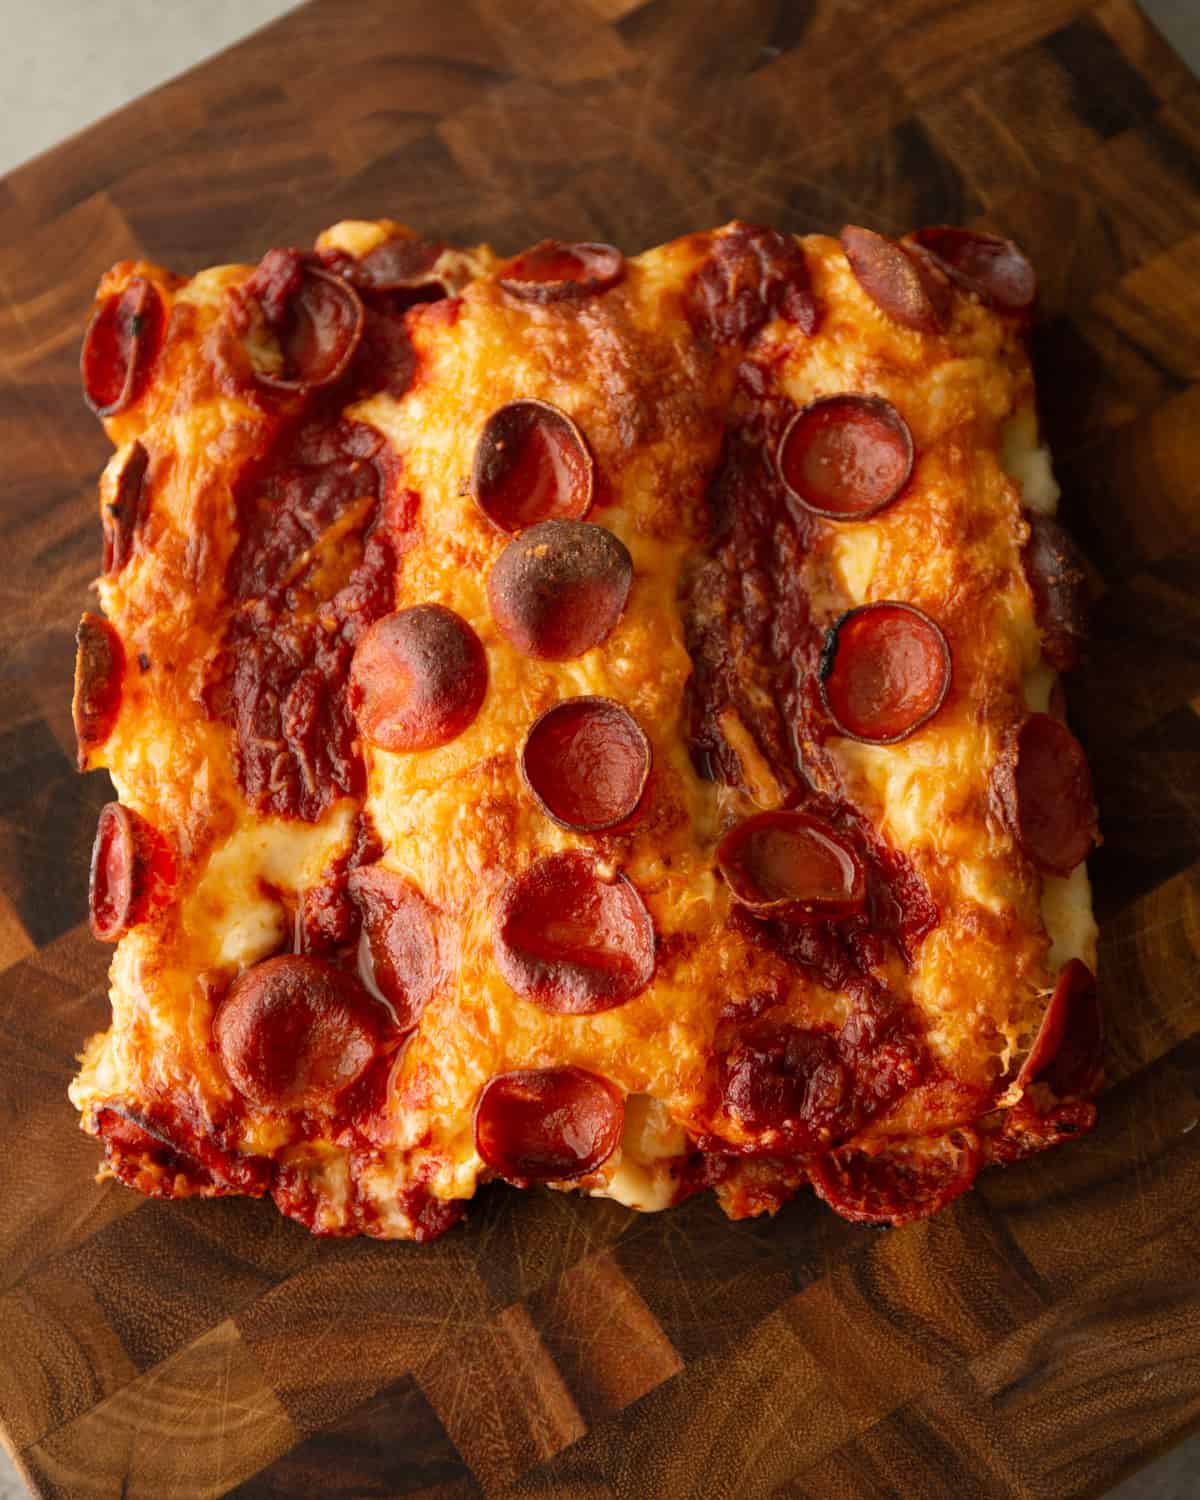 detroit style pizza on a wooden table